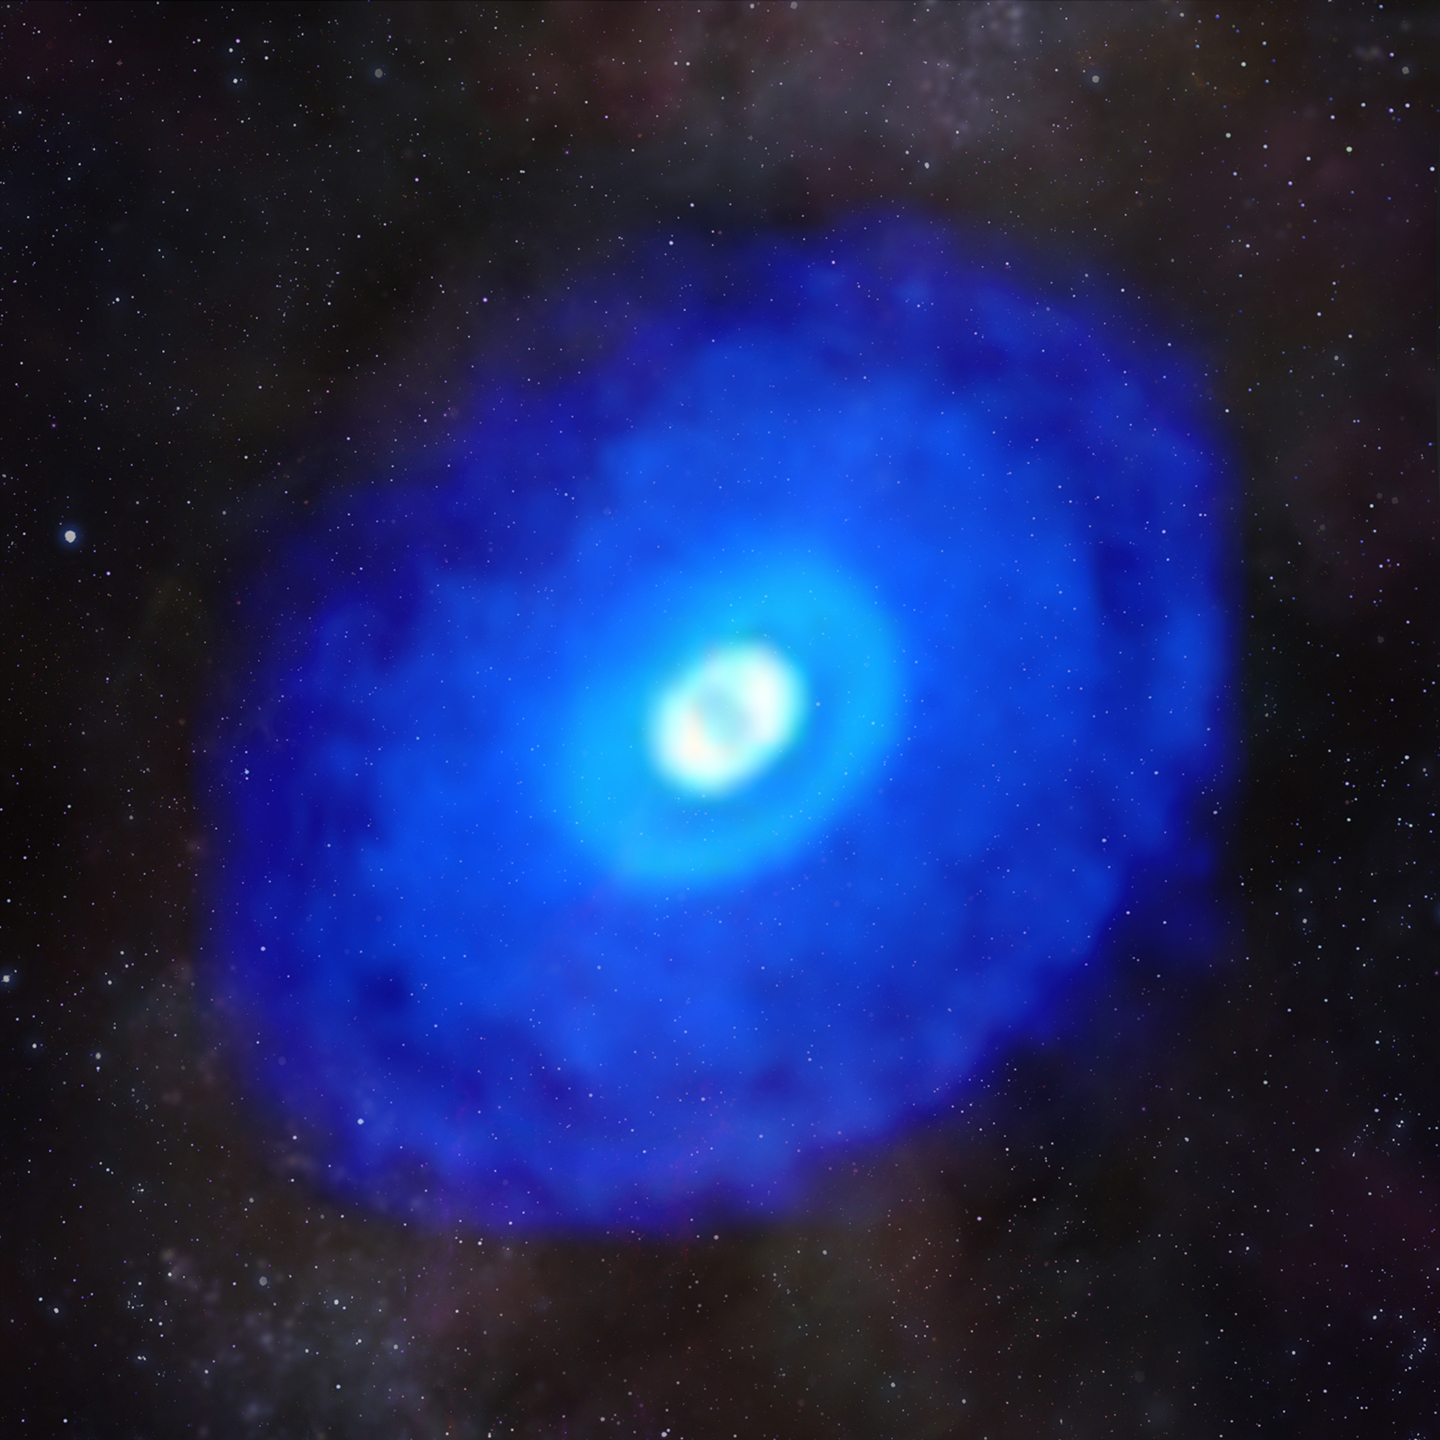 This composite image of ALMA data from the young star HD 163296 shows hydrogen cyanide emission laid over a starfield. The MAPS project zoomed in on hydrogen cyanide and other organic and inorganic compounds in planet-forming disks to gain a better understanding of the compositions of young planets and how the compositions link to where planets form in a protoplanetary disk.